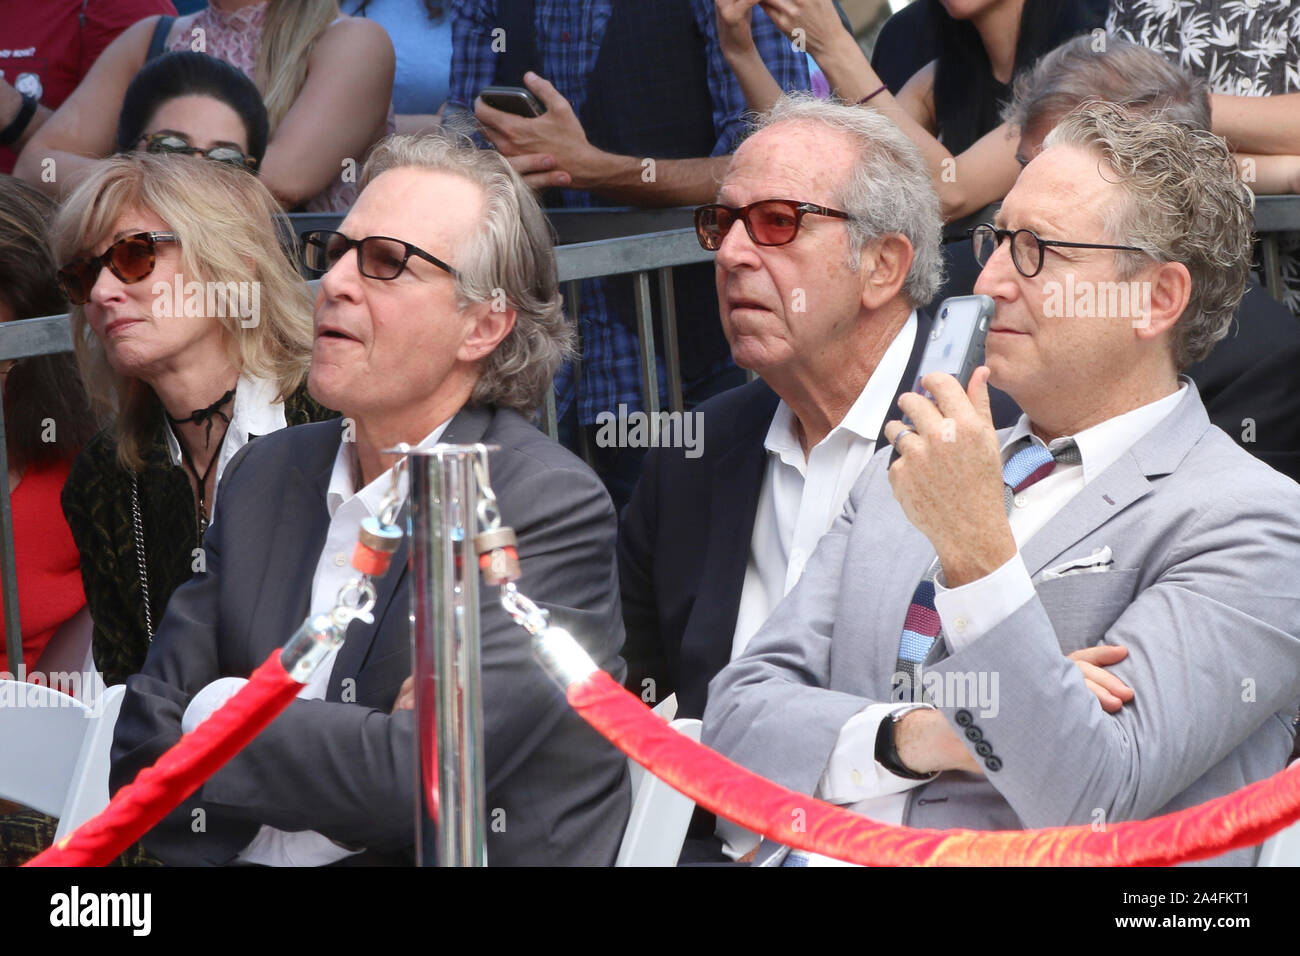 Judith Light Star Ceremony on the Hollywood Walk of Fame on September 12, 2019 in Los Angeles, CA Featuring: David Steinberg, Robert Desiderio, Brynn Thayer, Bernard Telsey Where: Los Angeles, California, United States When: 12 Sep 2019 Credit: Nicky Nelson/WENN.com Stock Photo